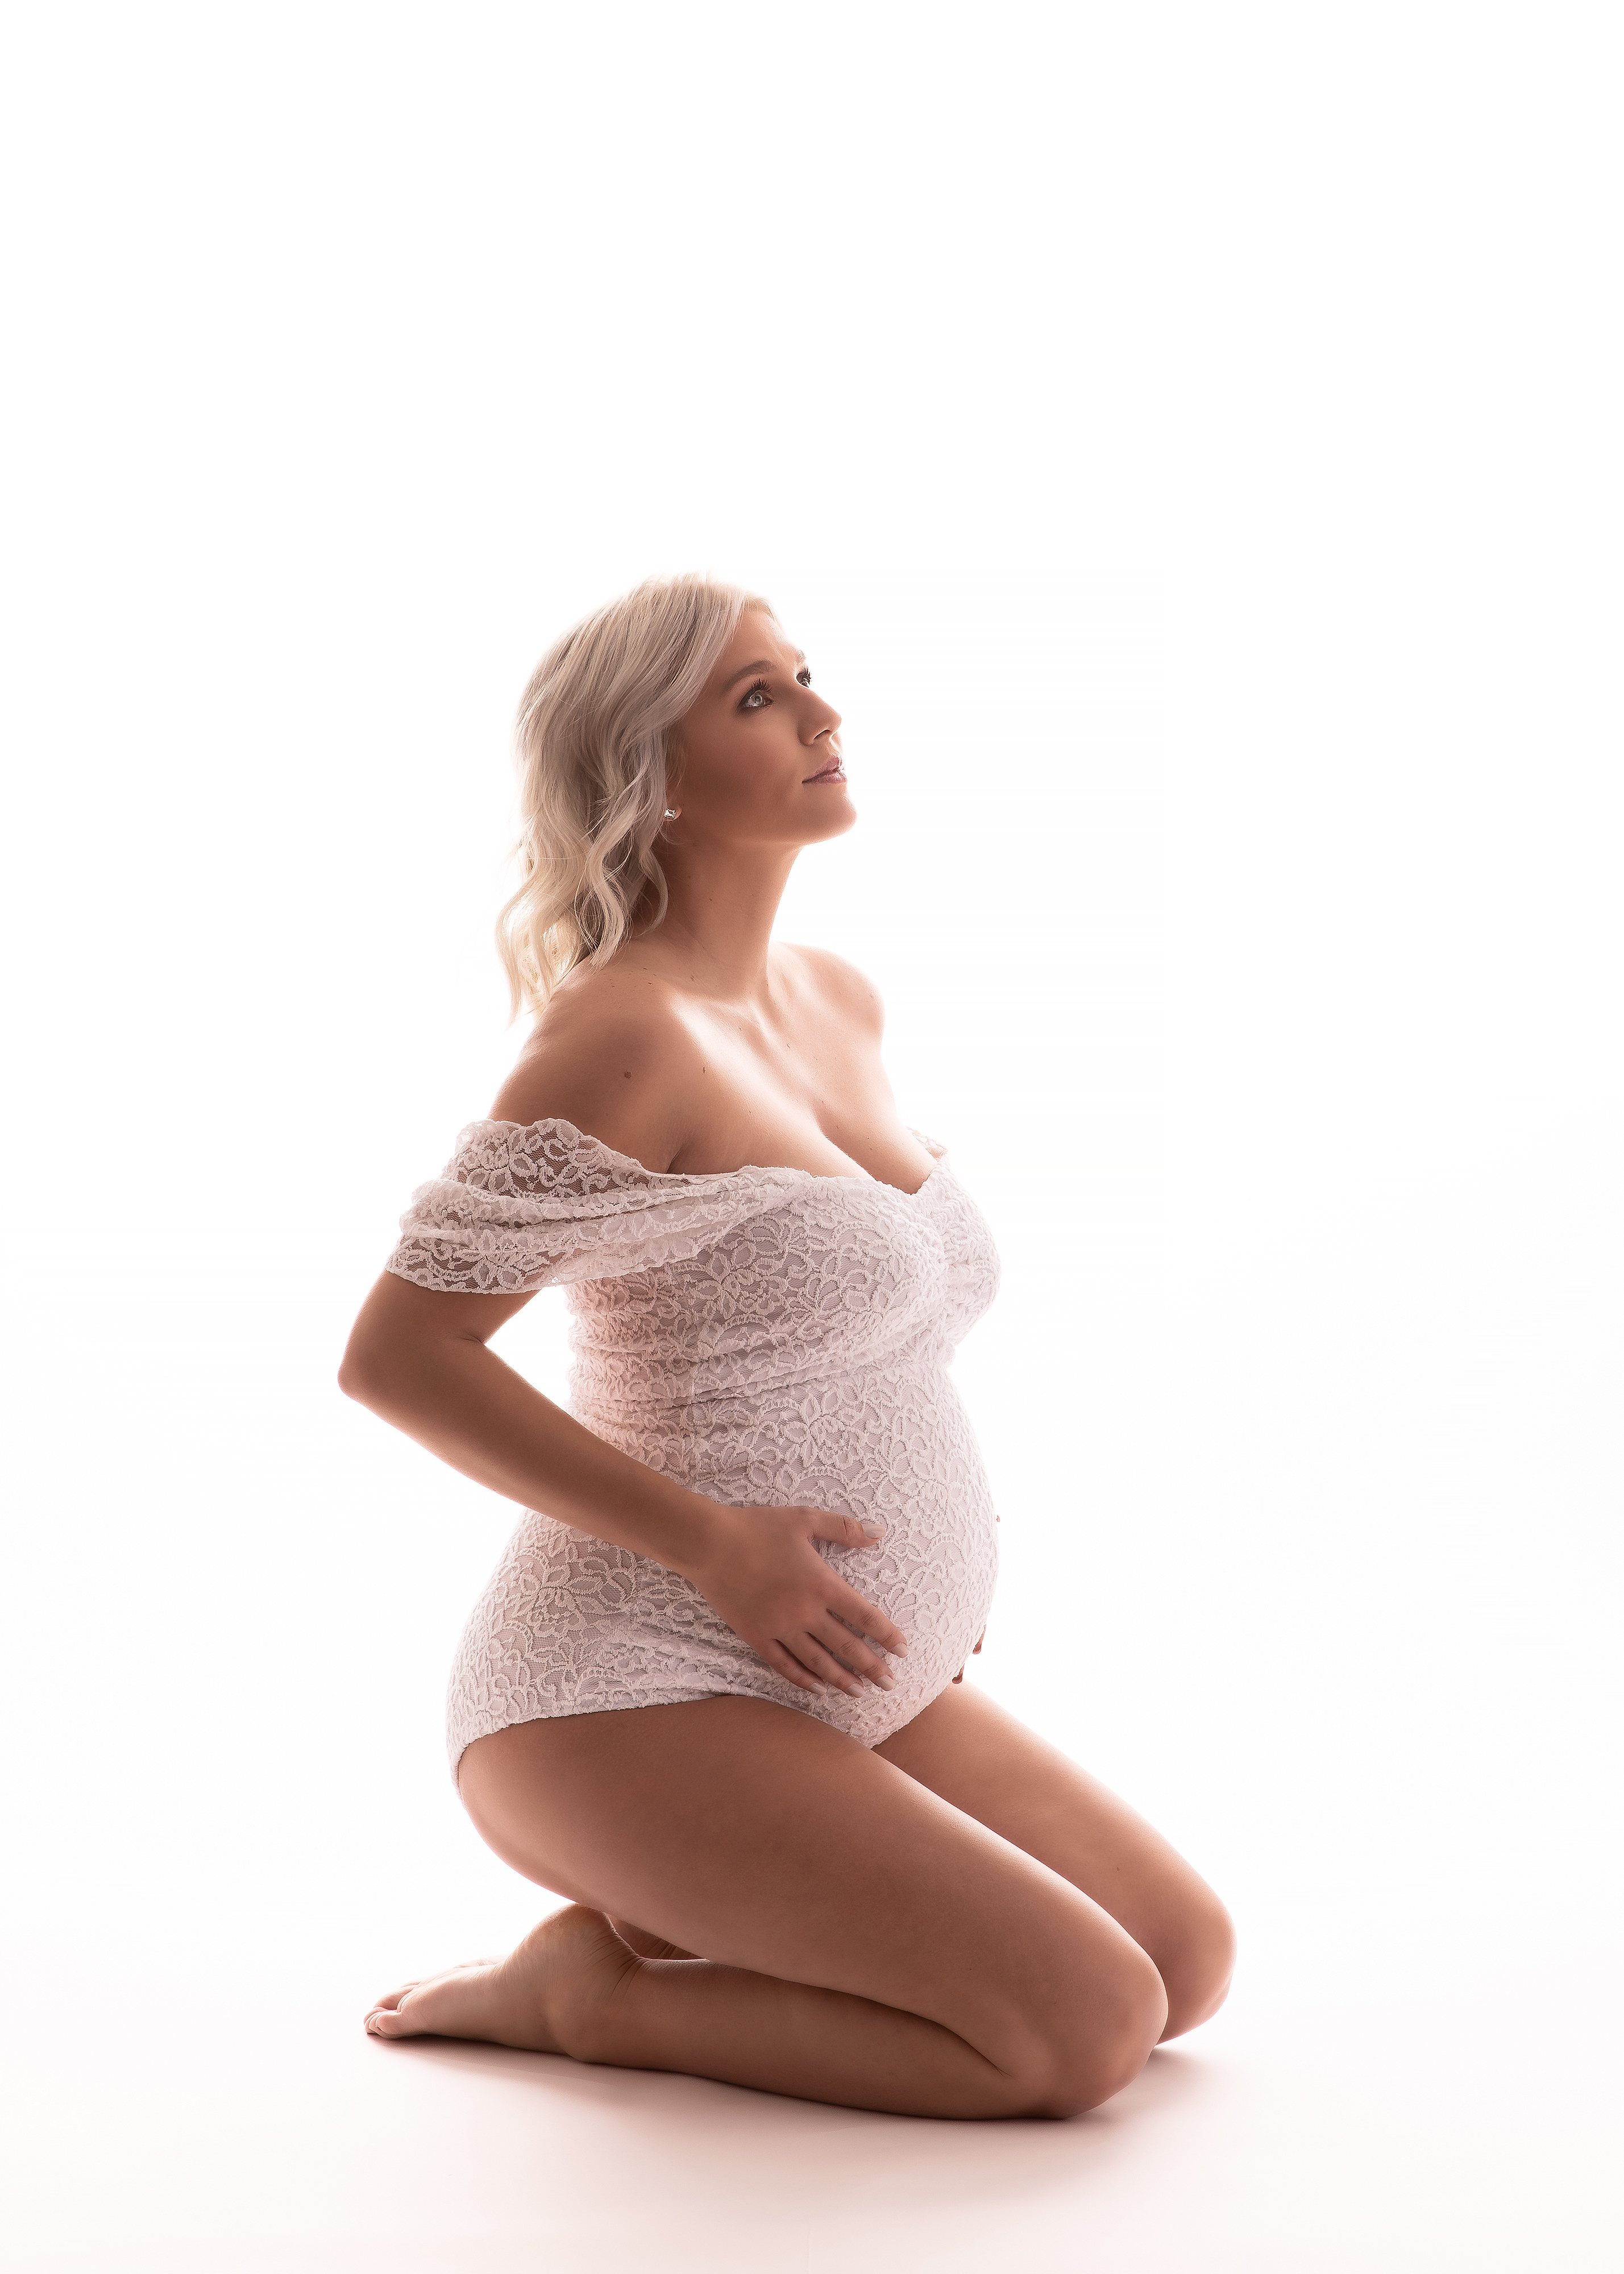 Maternity Photographer, an expectant mother wears a lacy body suit and holds her belly as she sits on her knees